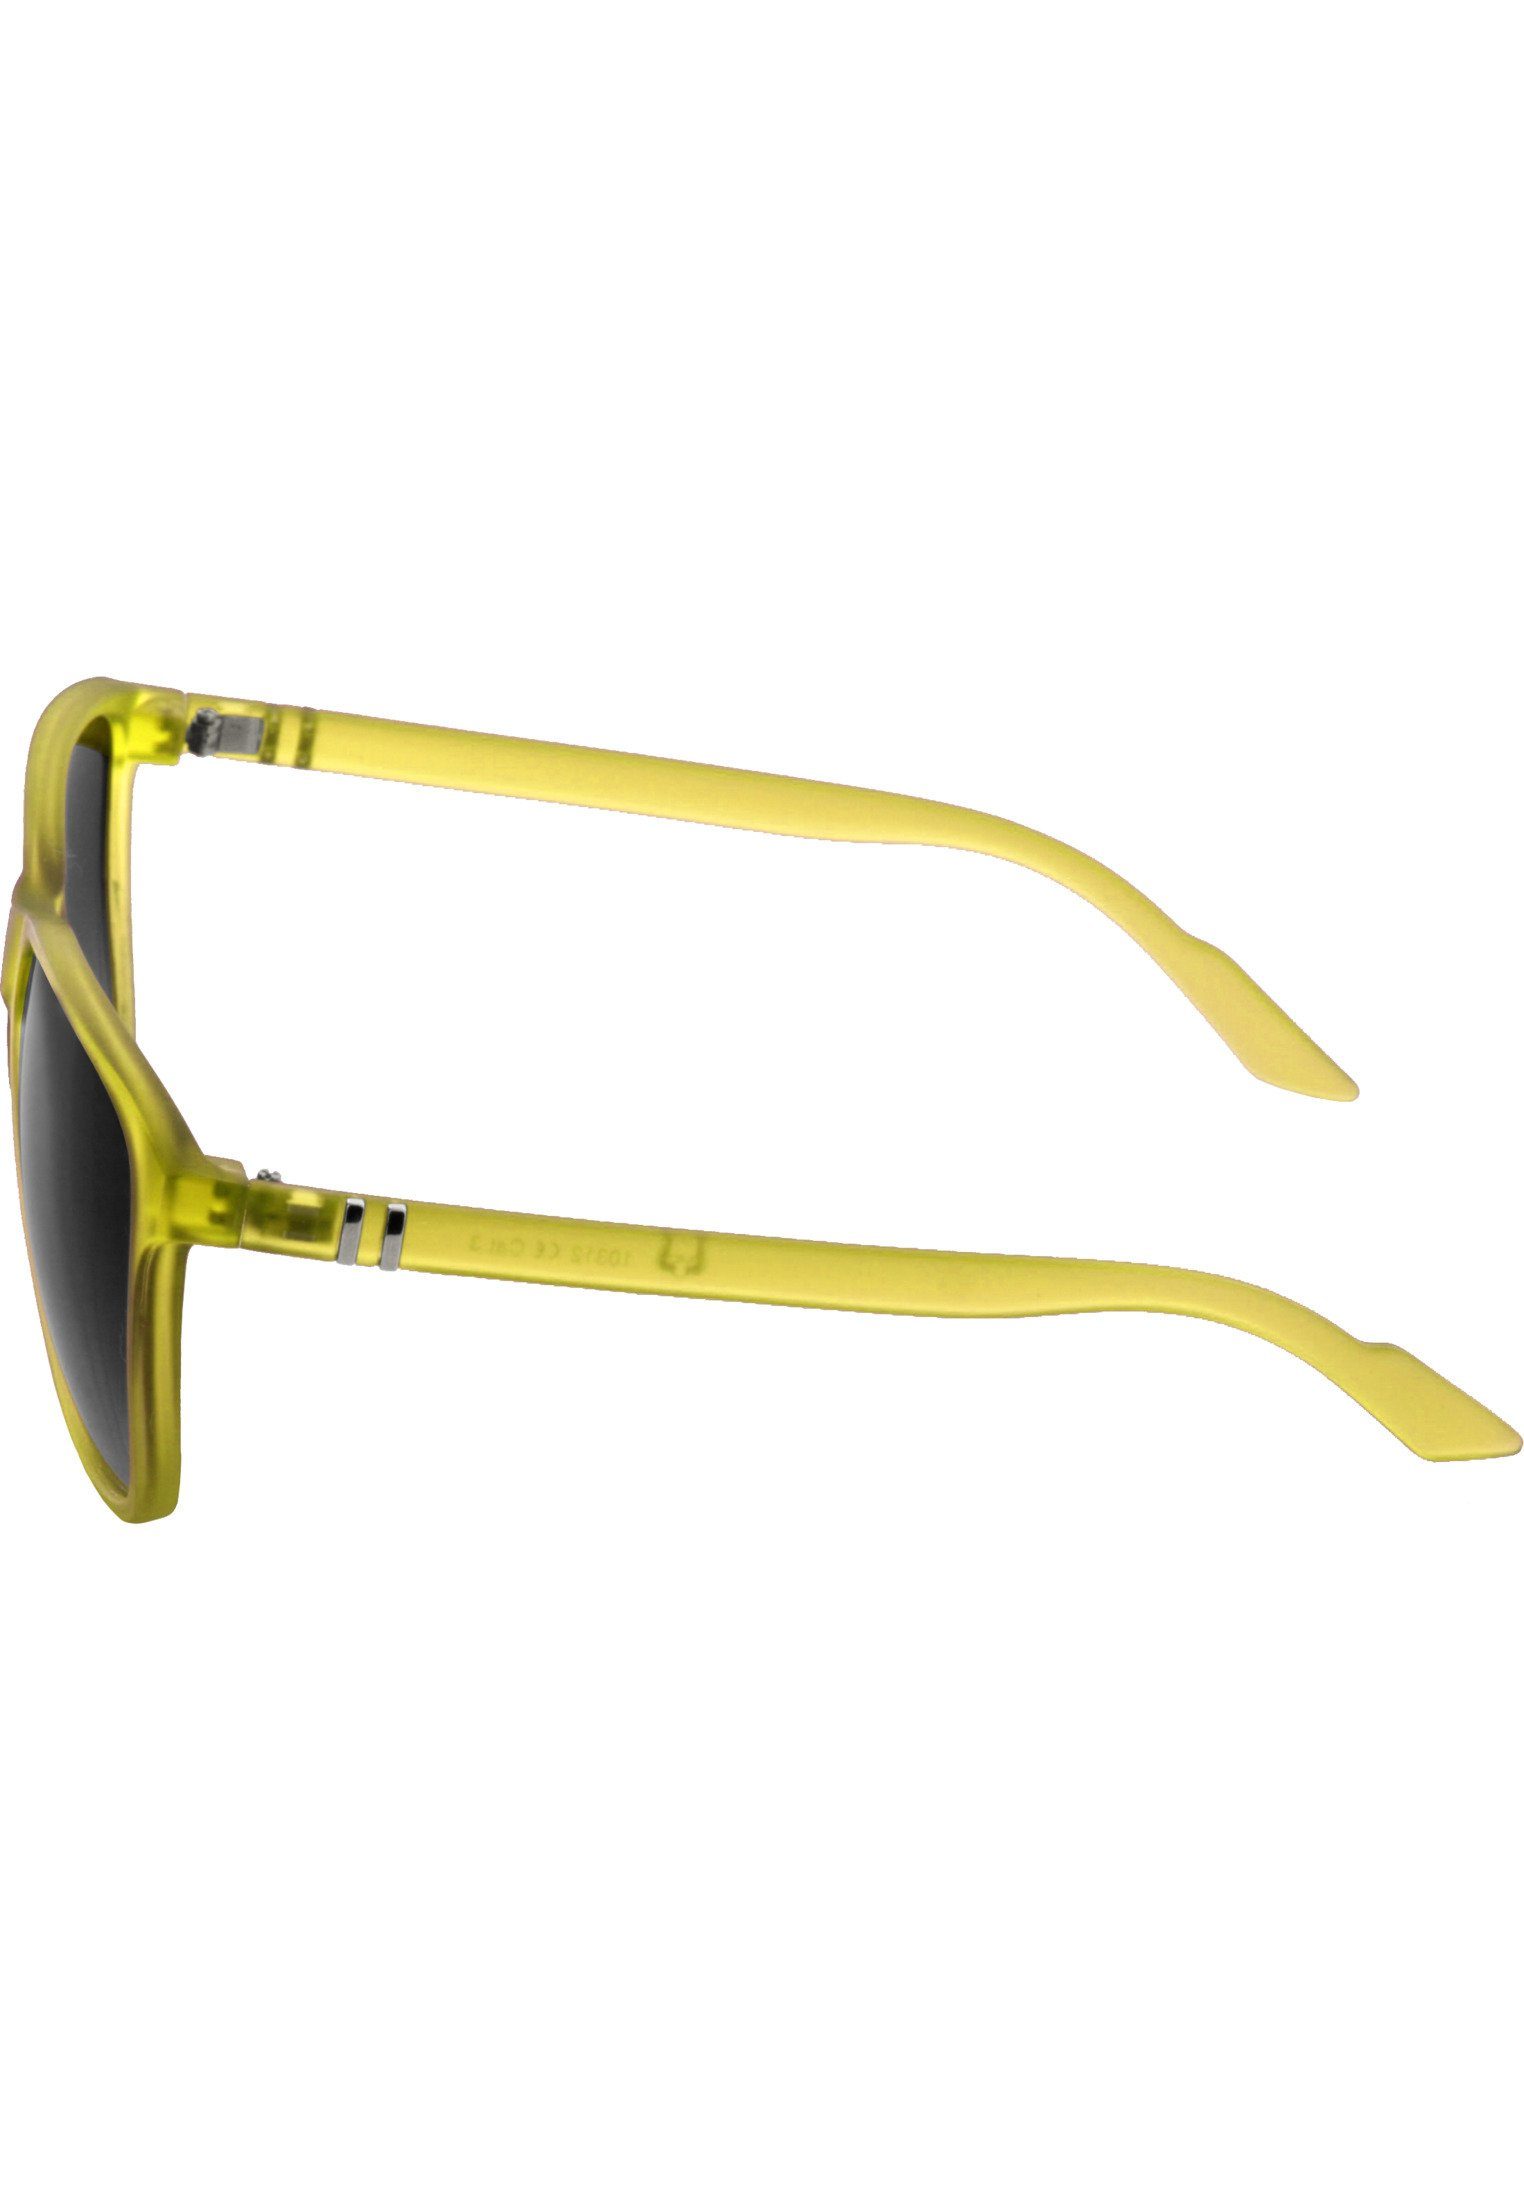 Sunglasses neonyellow Sonnenbrille Accessoires Chirwa MSTRDS